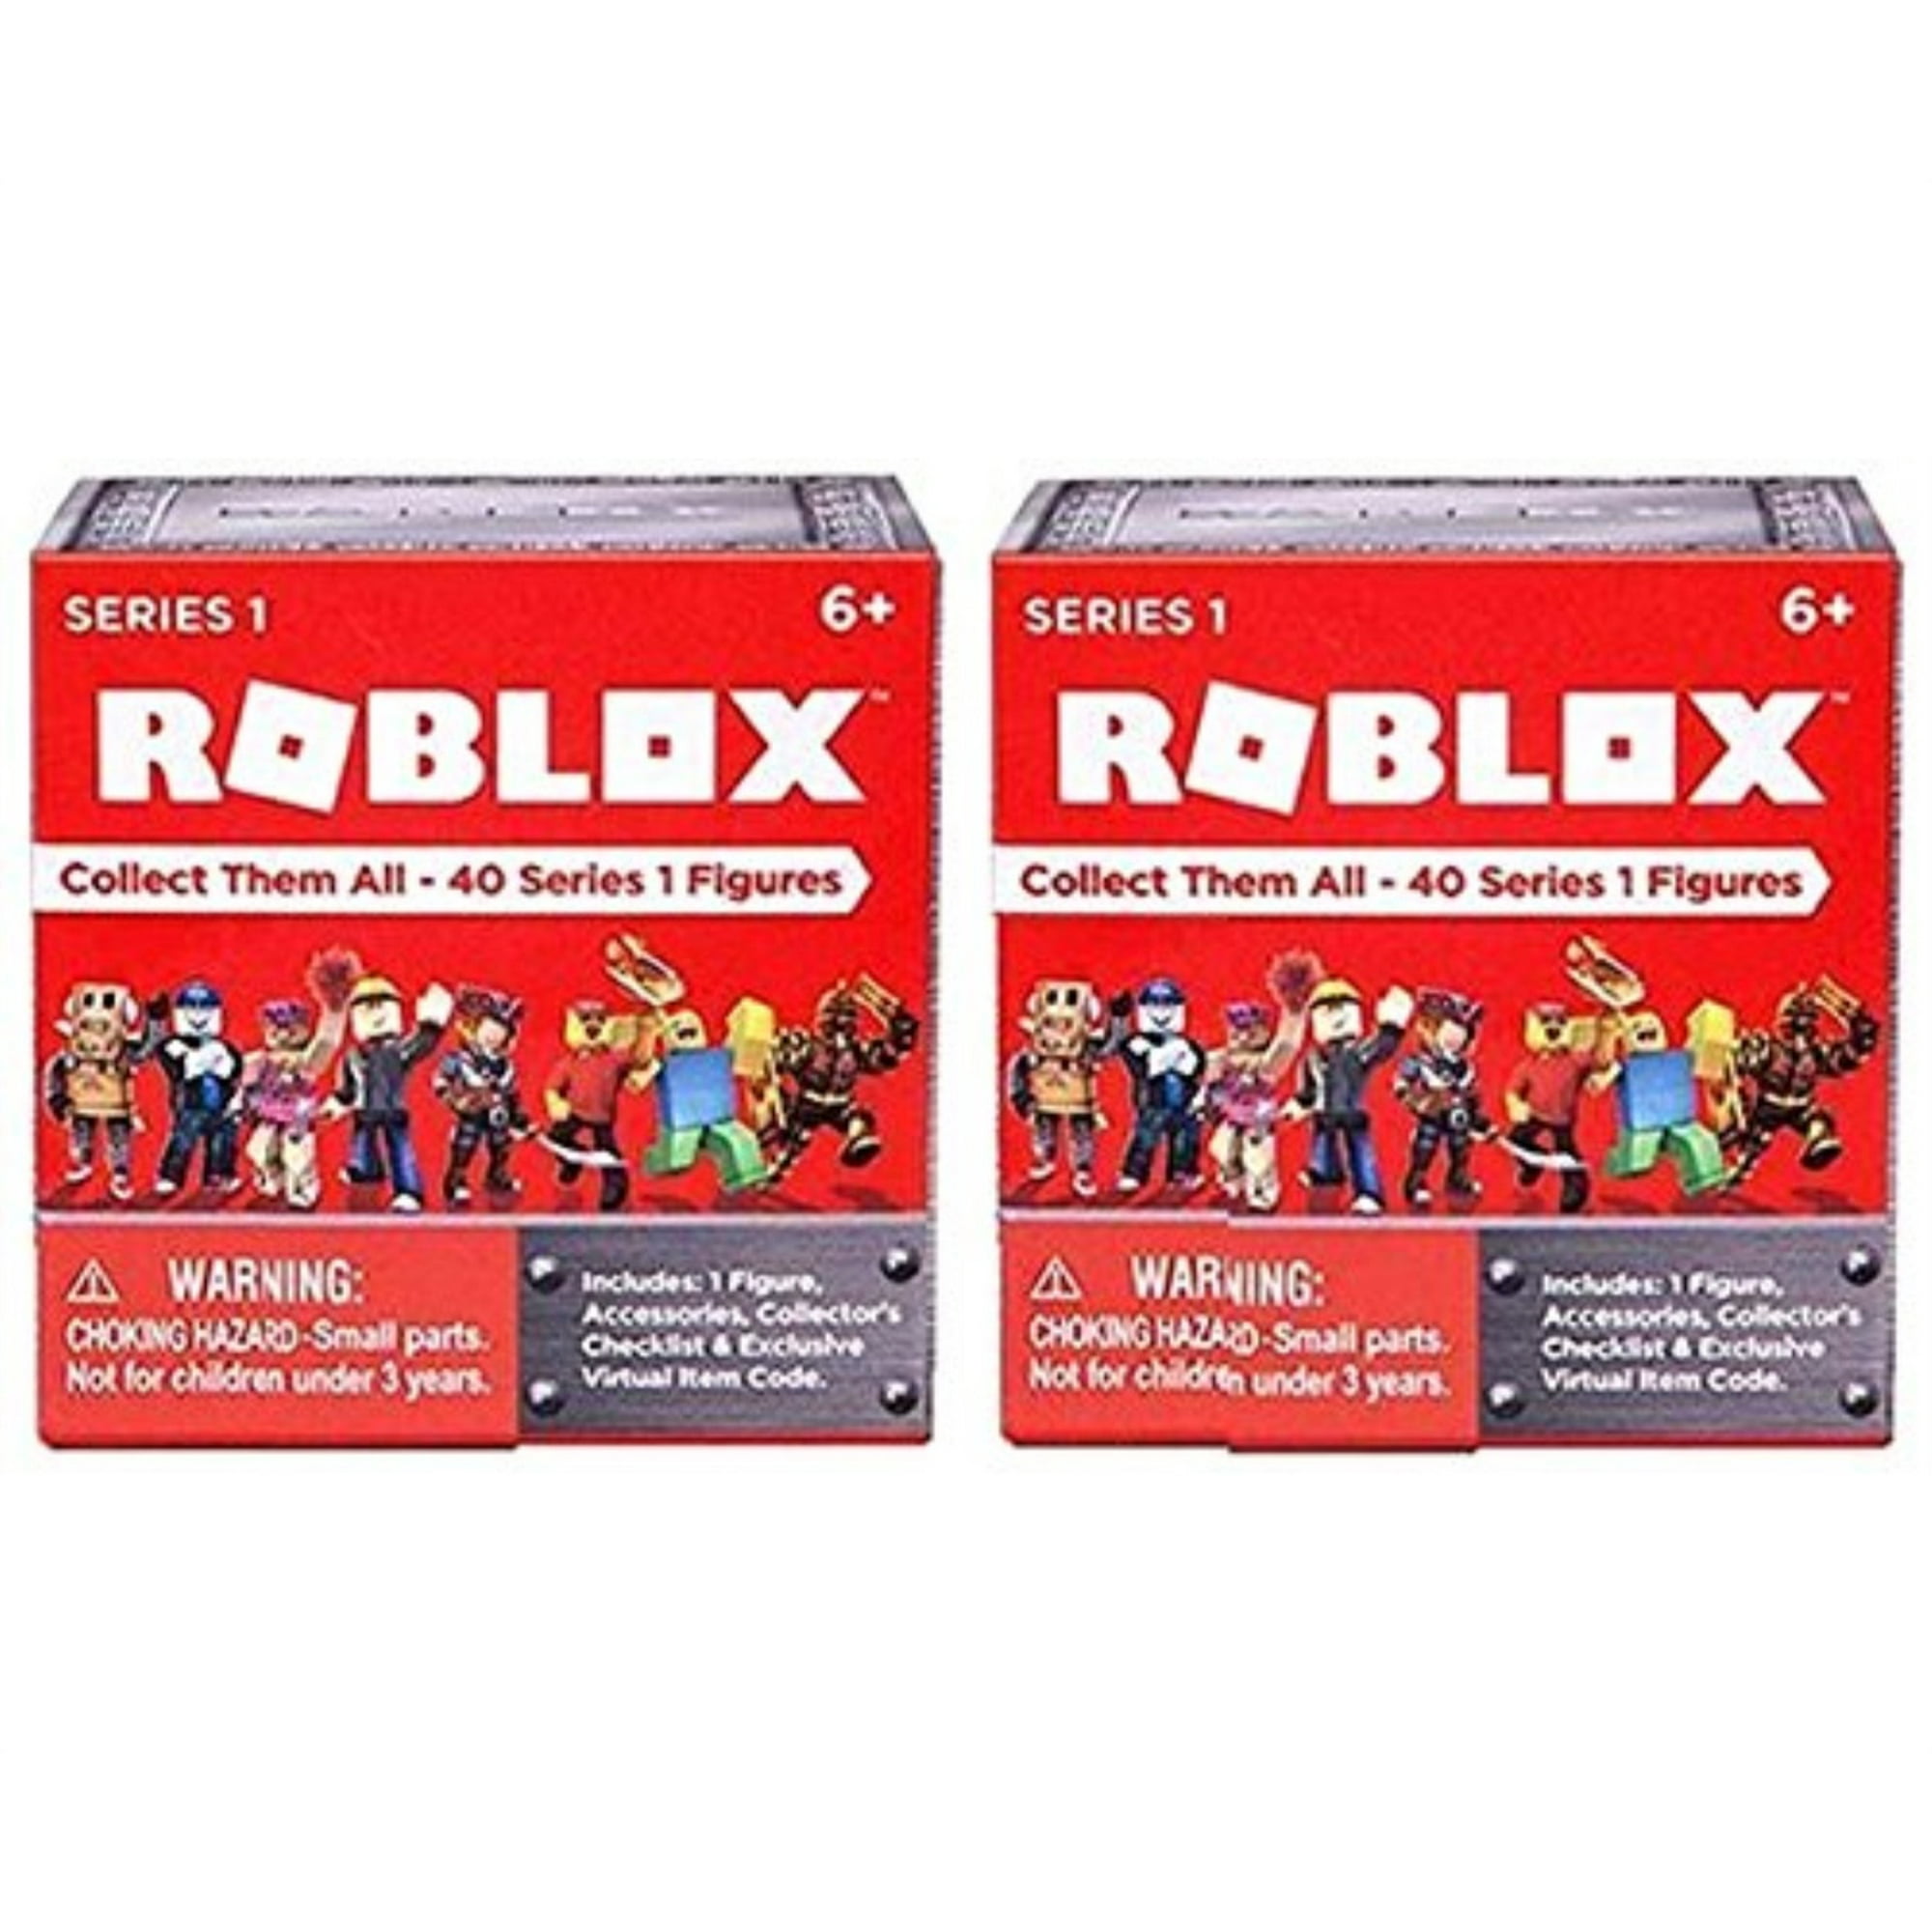 Roblox Series 1 Action Figure Mystery Box Set Of 2 Boxes - plasma television roblox